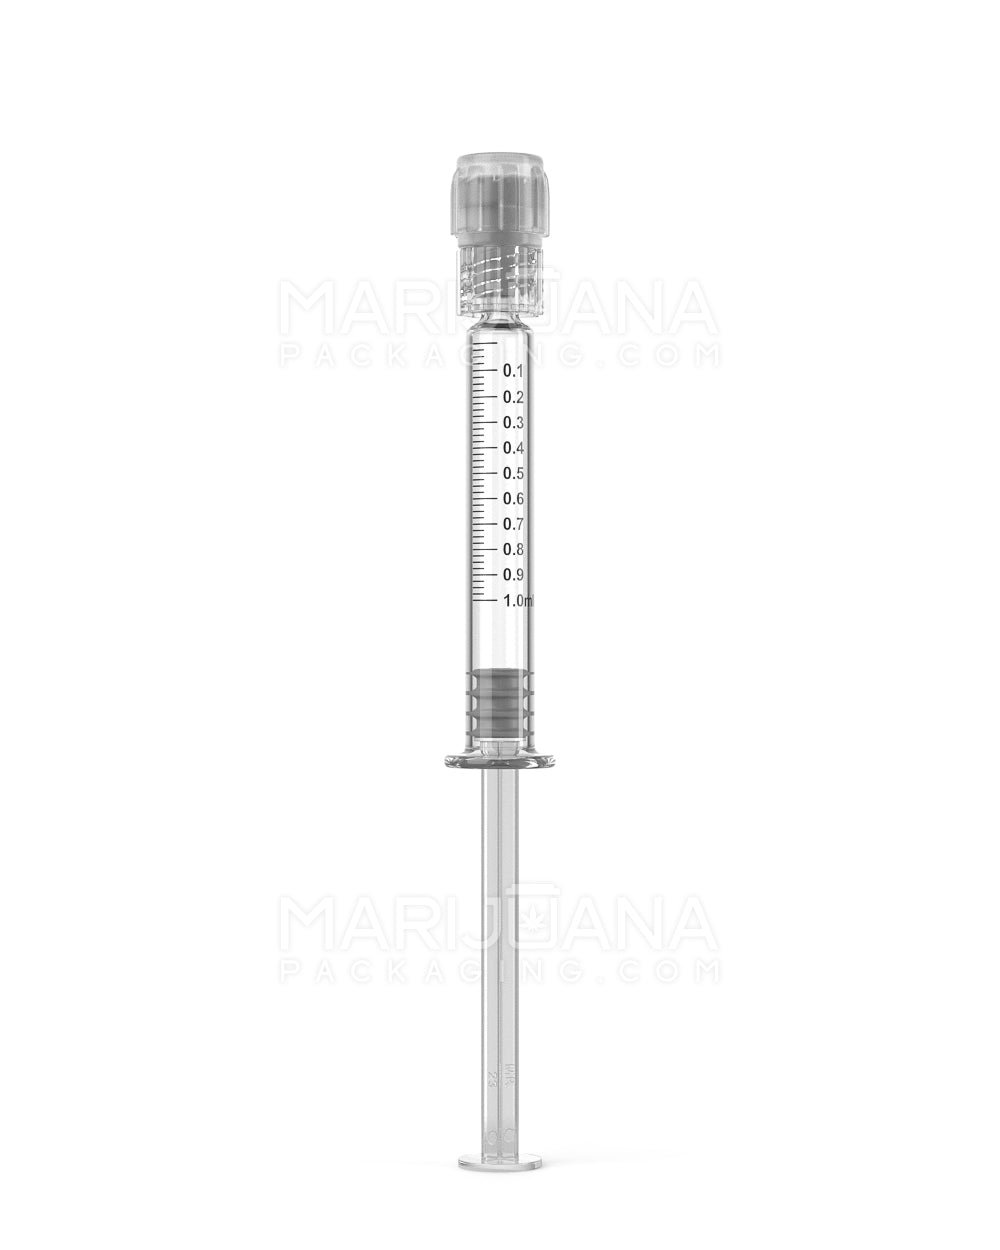 Child Resistant & Luer Lock | Long Glass Dab Applicator Syringes | 1mL - 0.1mL Increments - 100 Count - 1